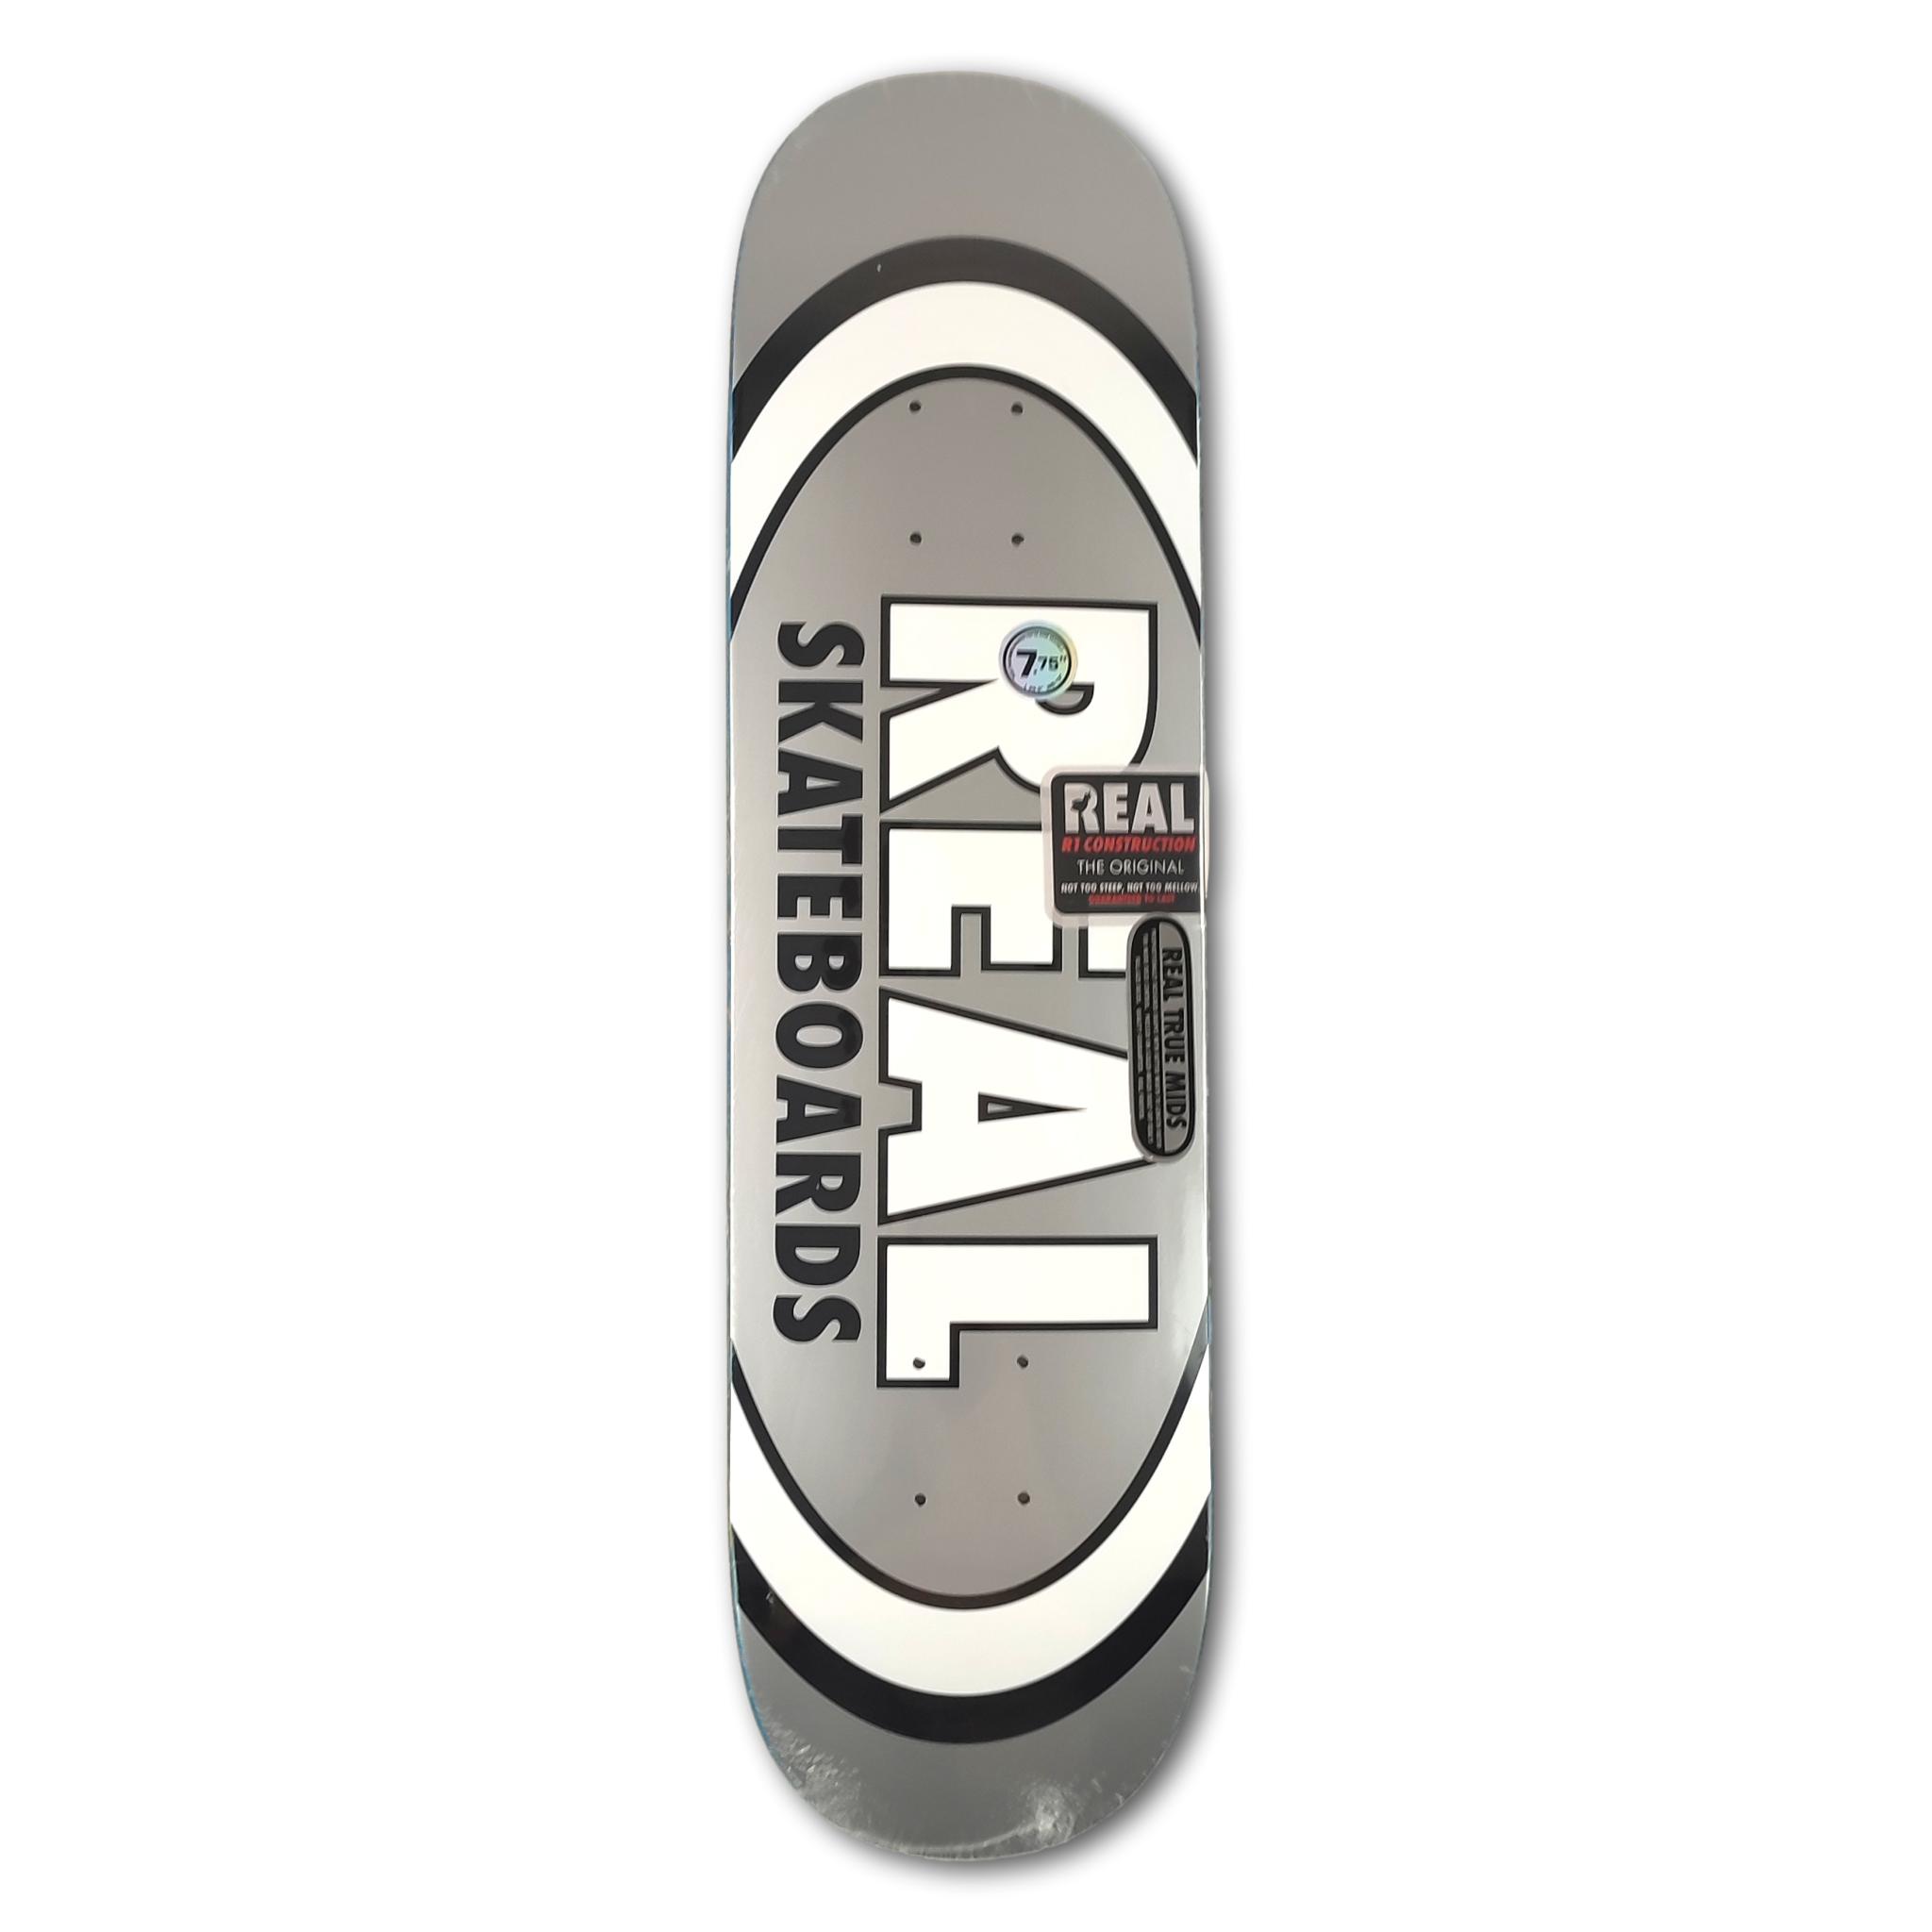 Real classic oval skateboards deck 7.75